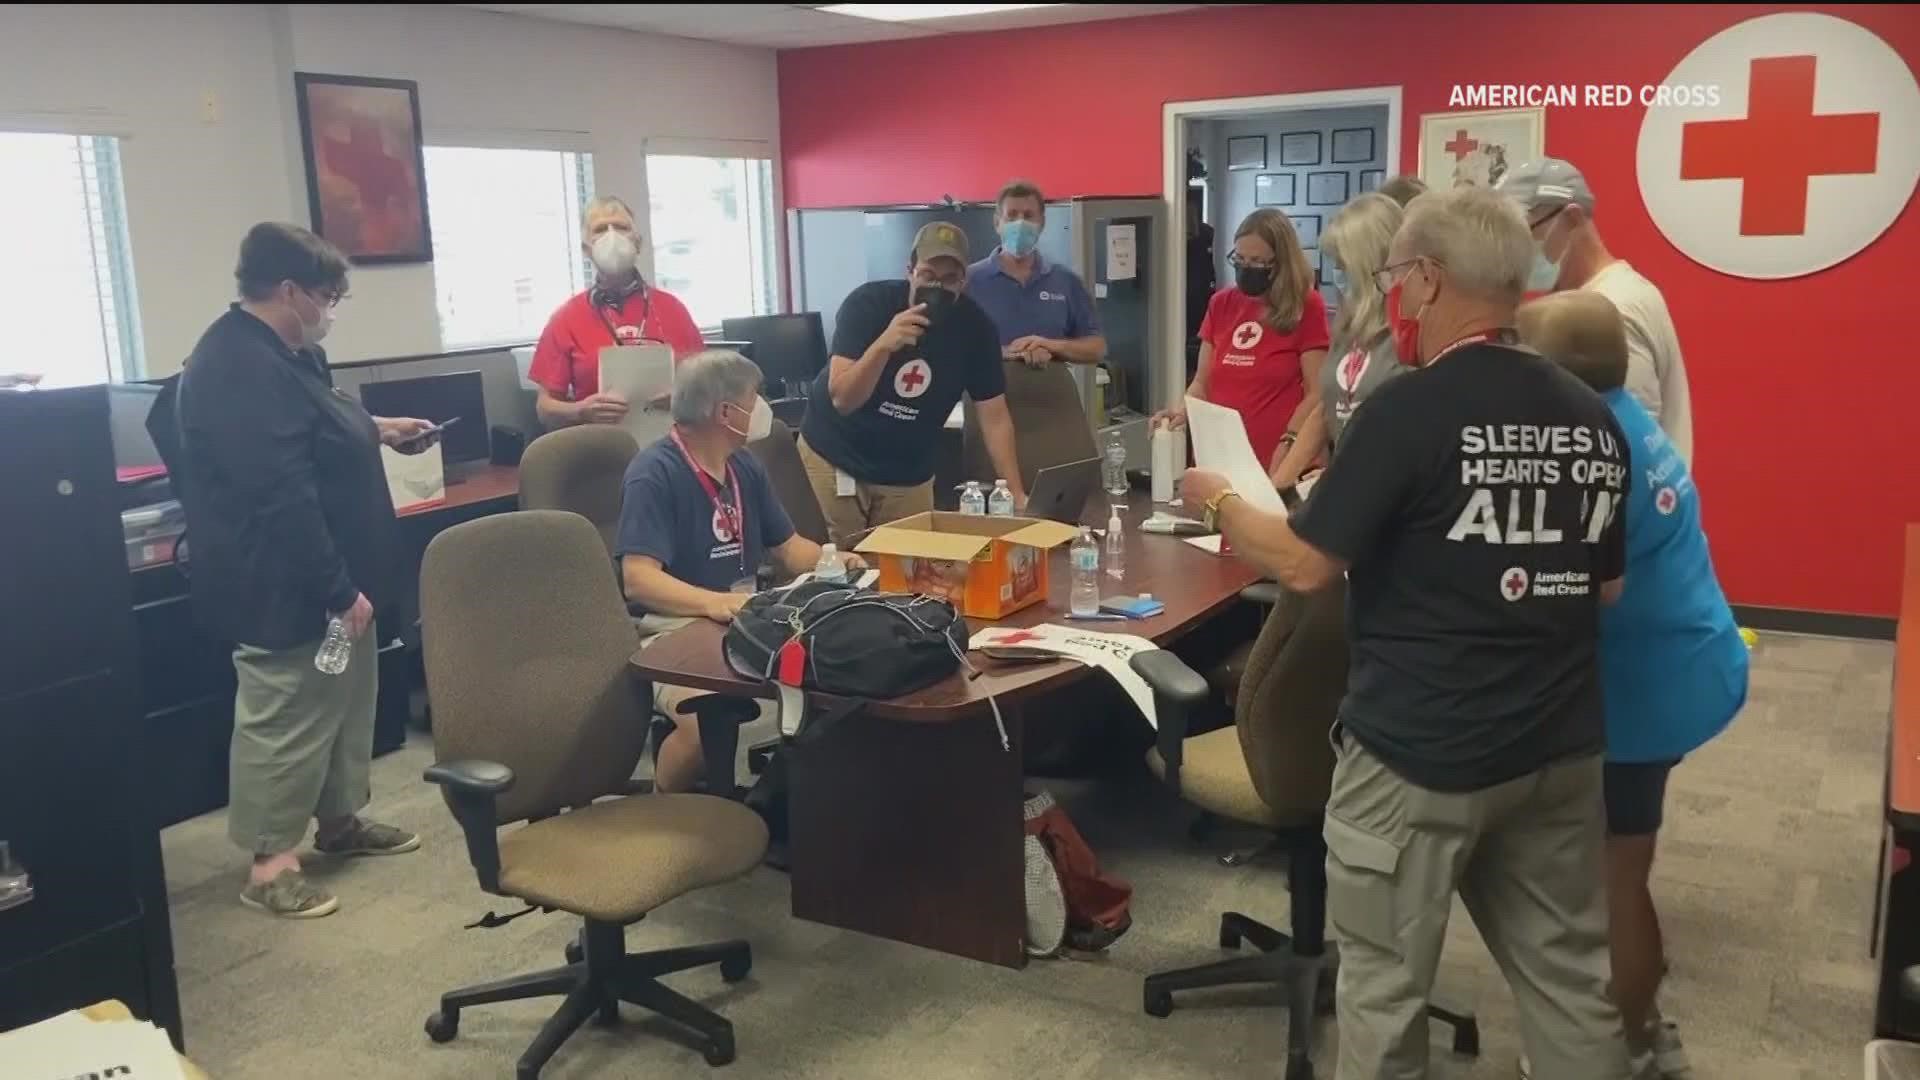 American Red Cross, San Diego chapter has volunteers ready to deploy if assistance is needed in Florida.